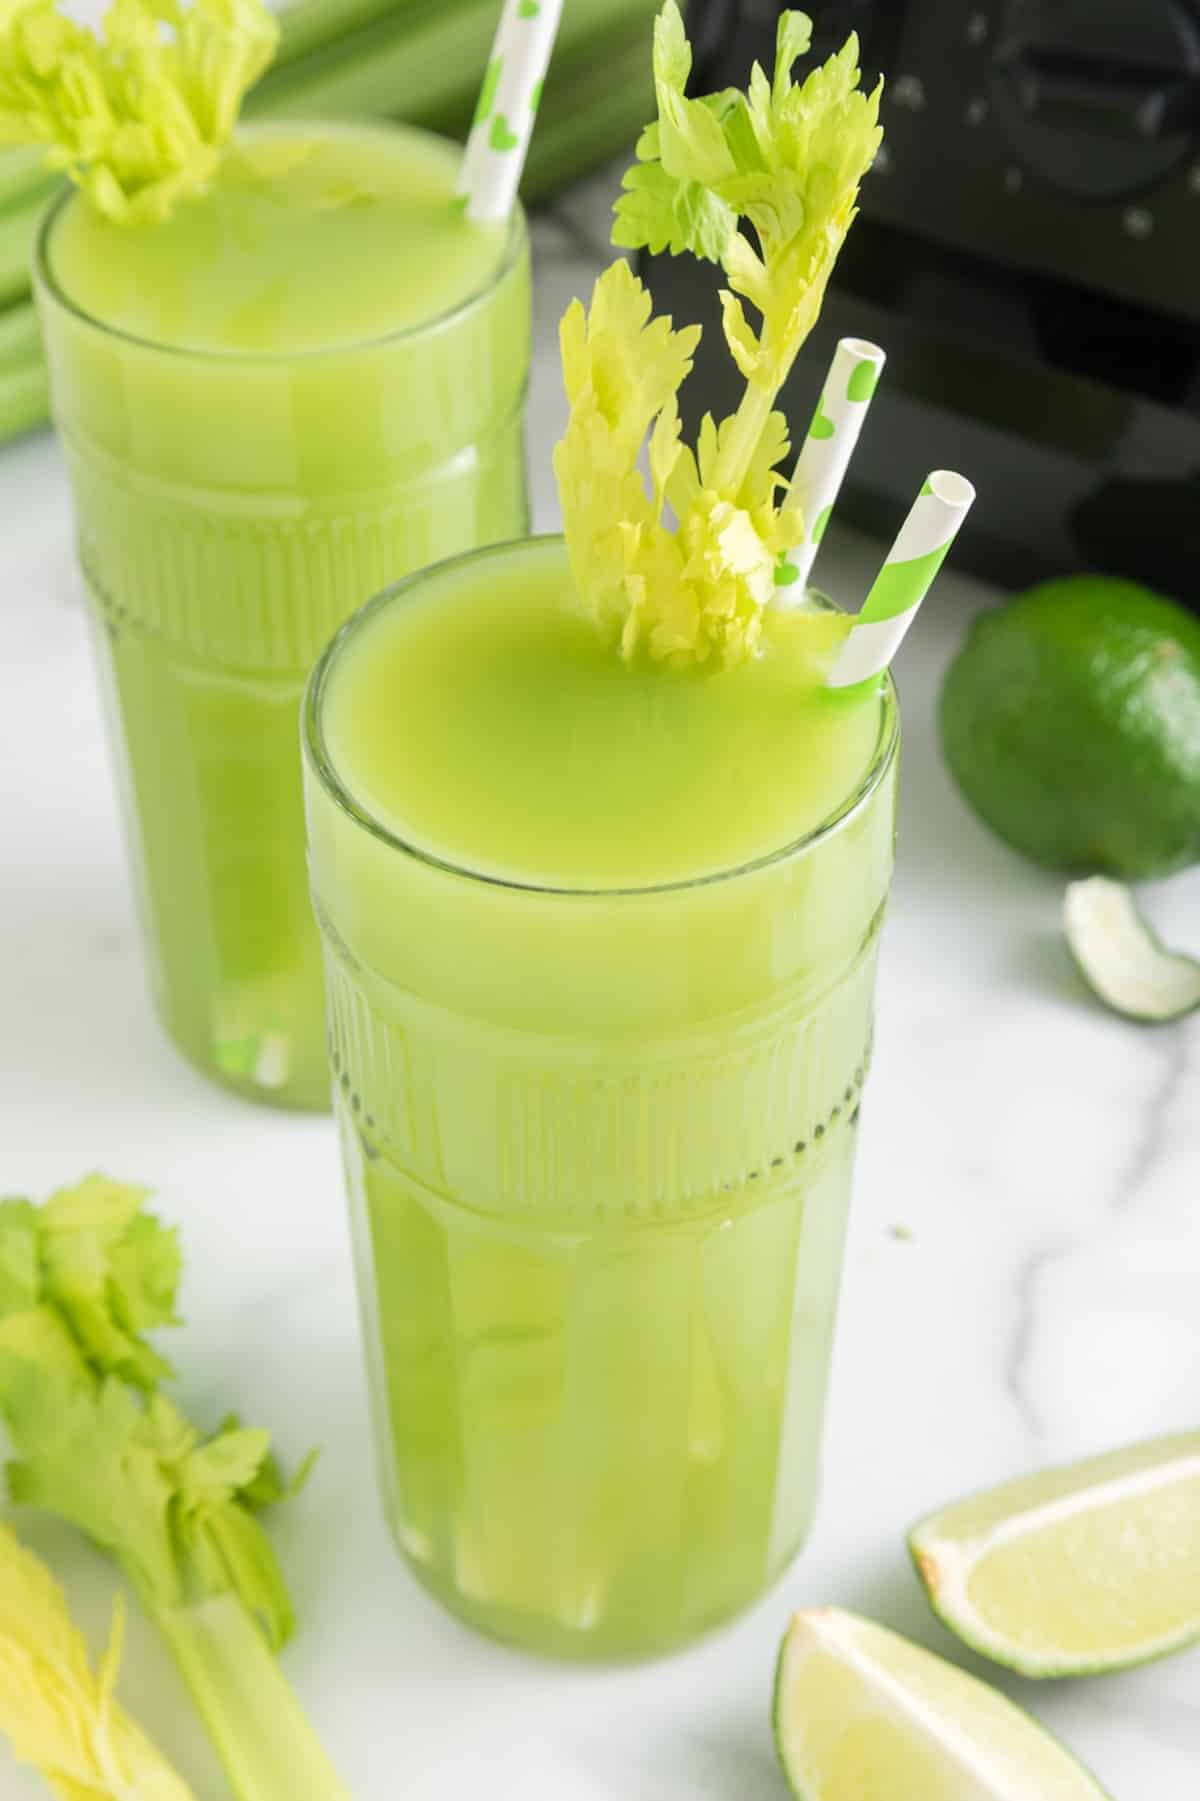 two glasses of celery juice with striped straws.